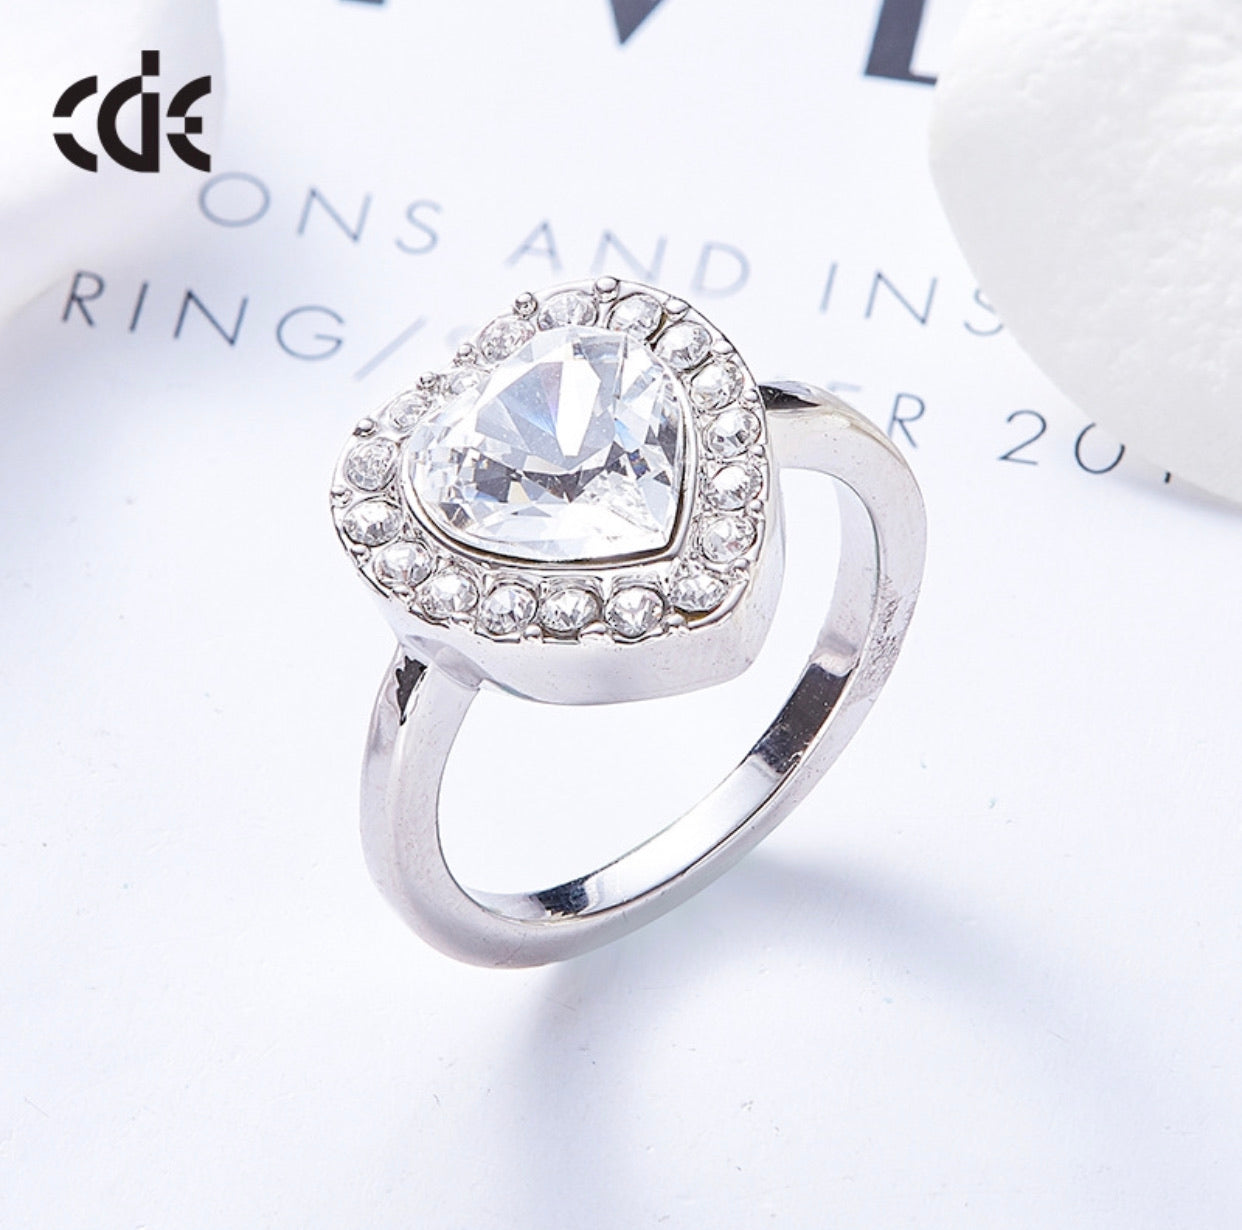 The shining heart shaped ring - CDE Jewelry Egypt